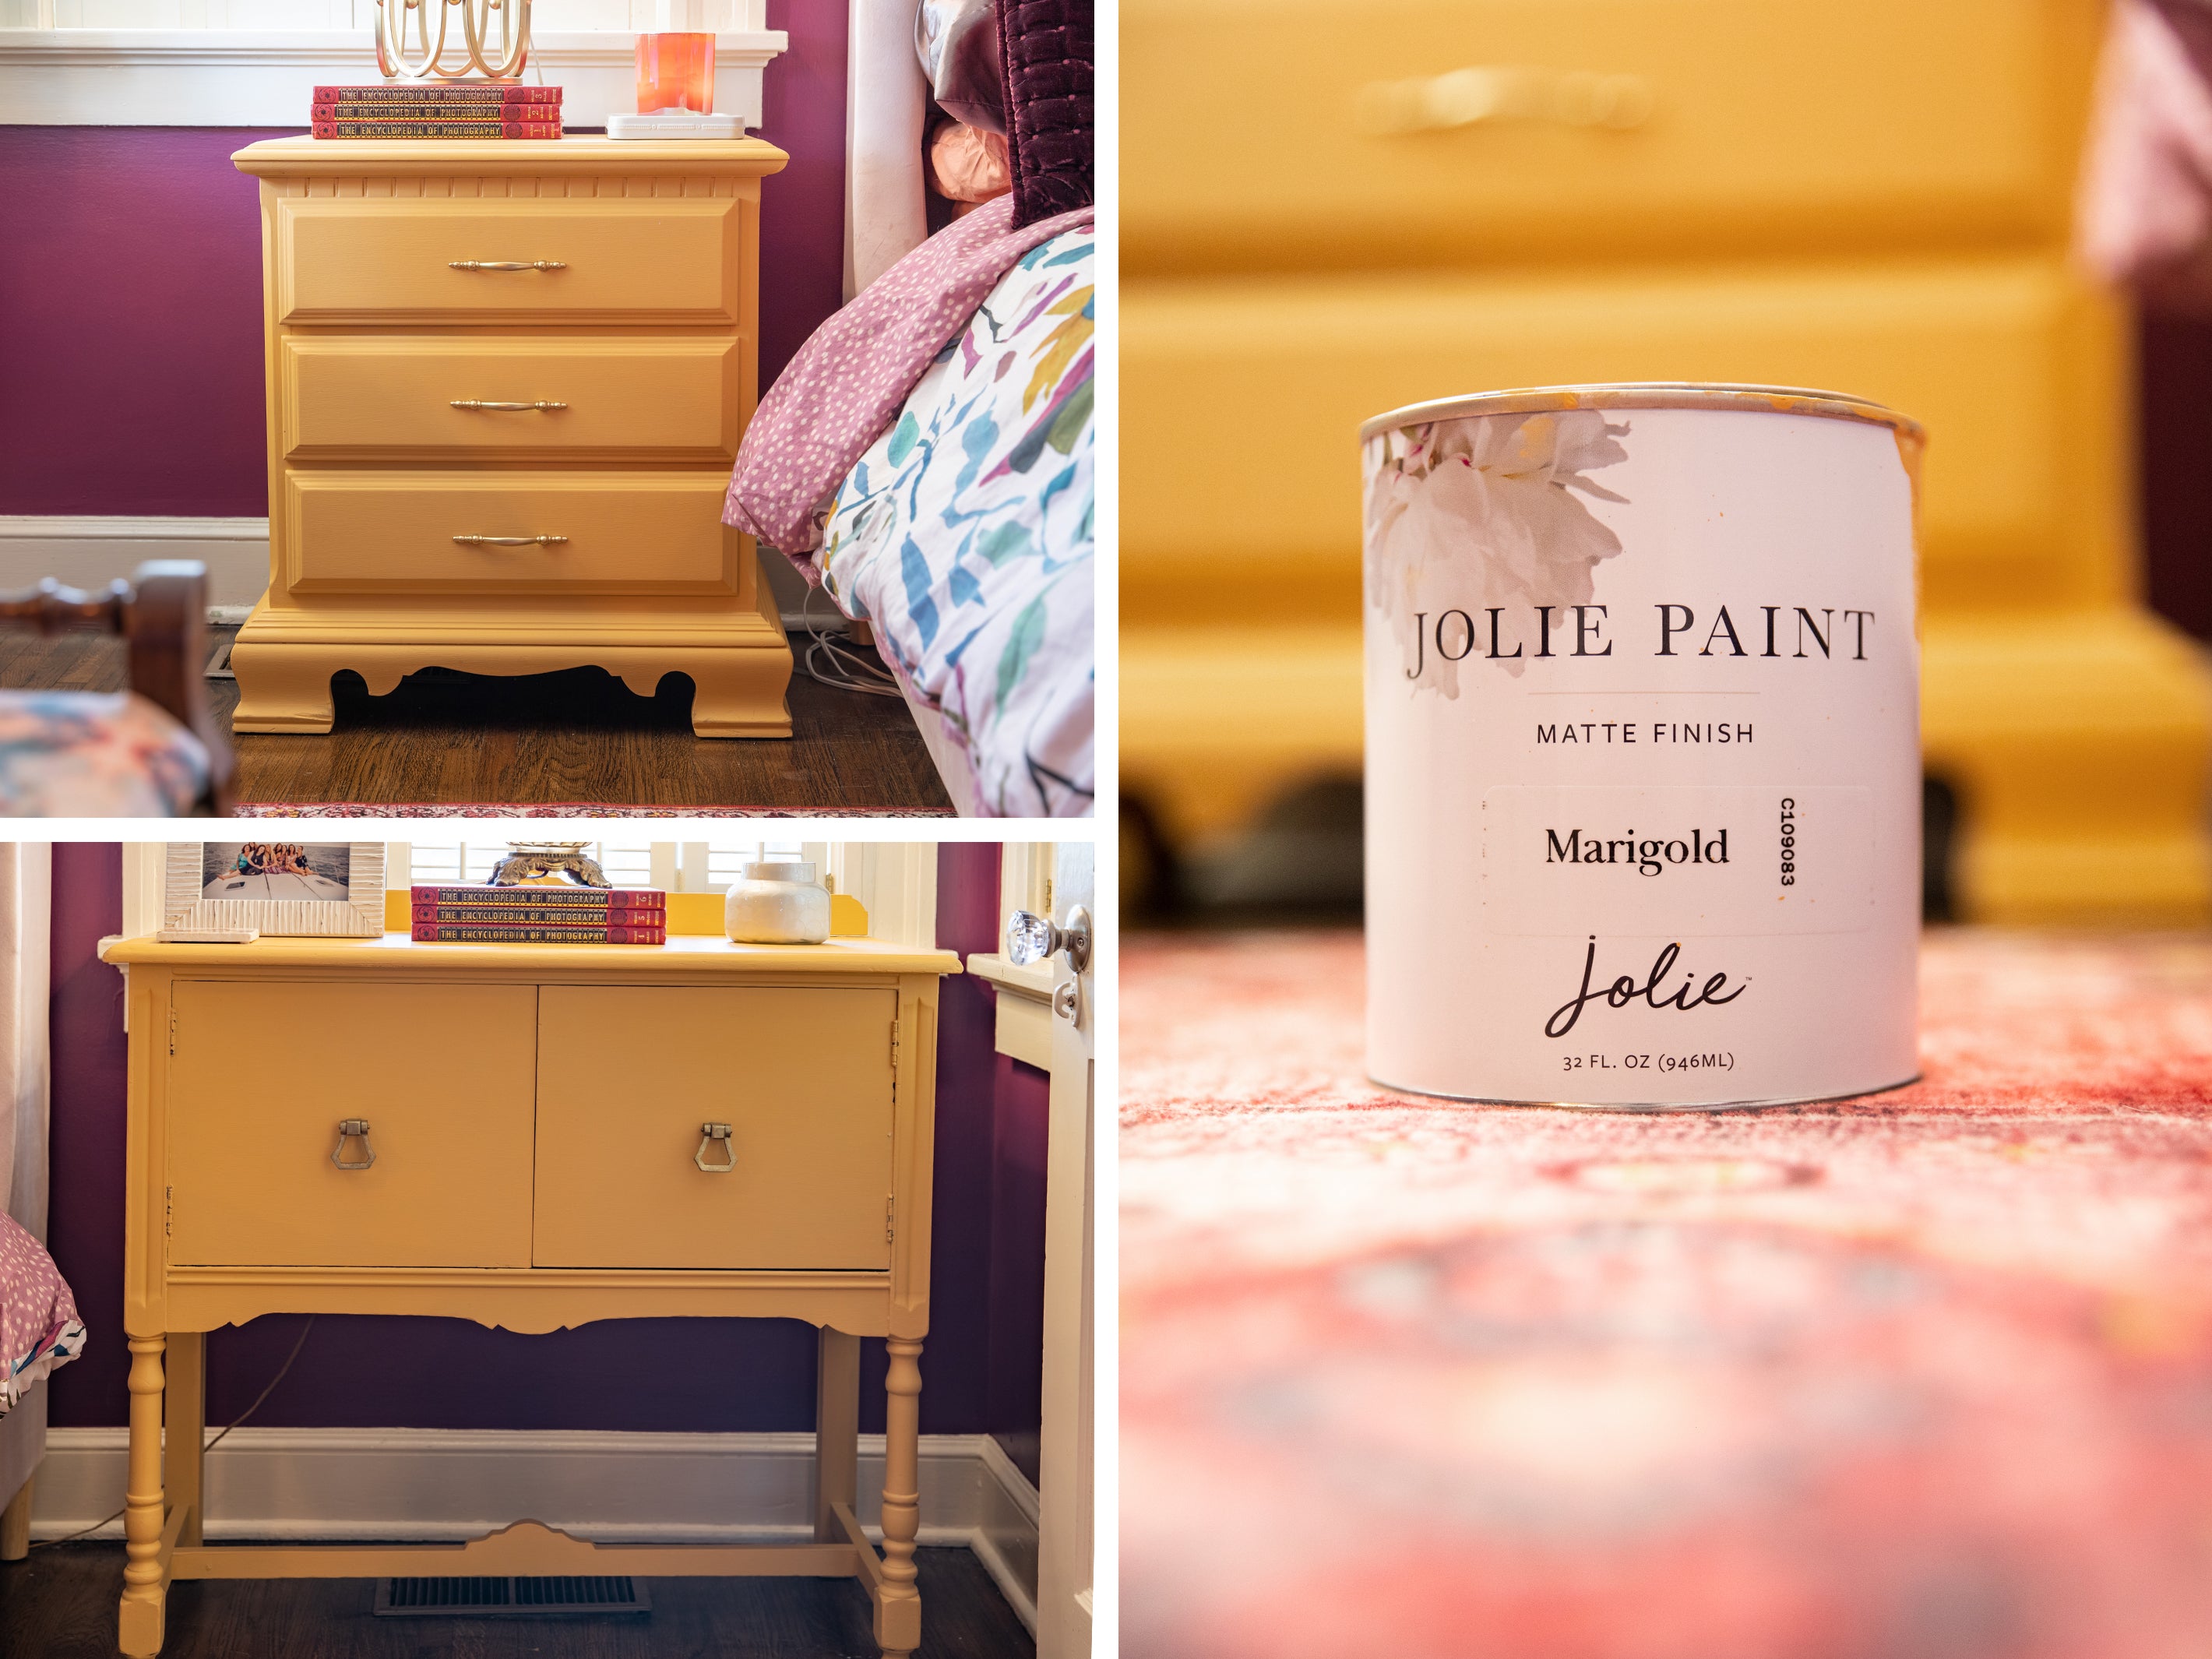 Jolie Paint Marigold can by two night stands